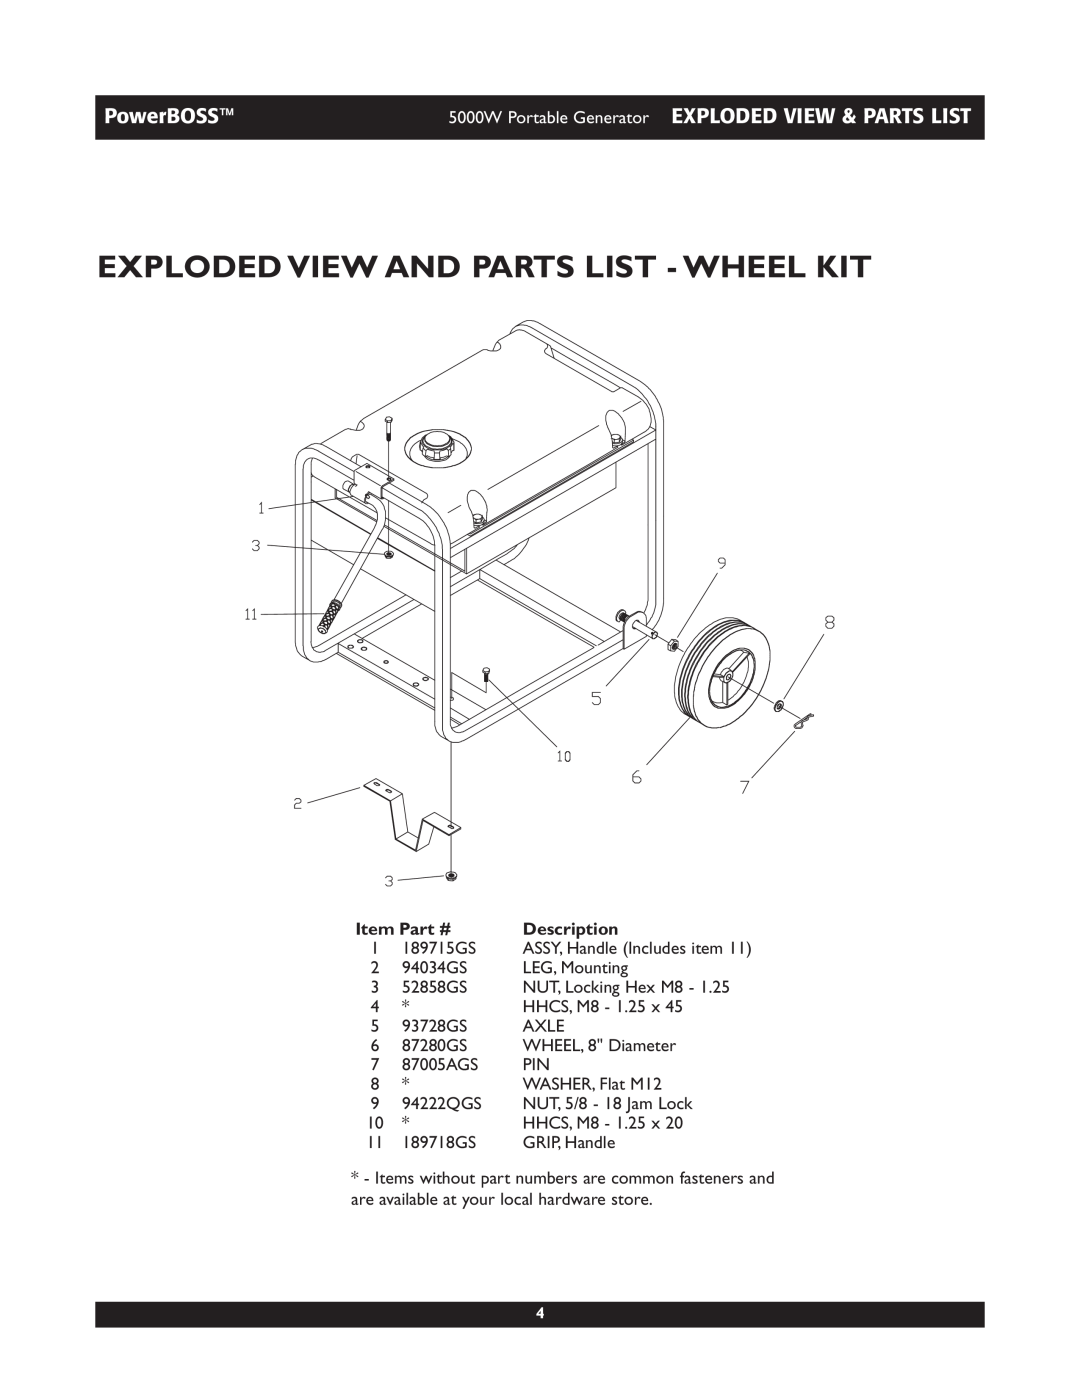 PowerBass 30222 manual Exploded View And Parts List - Wheel Kit, PowerBOSS, Item Part #, Description 